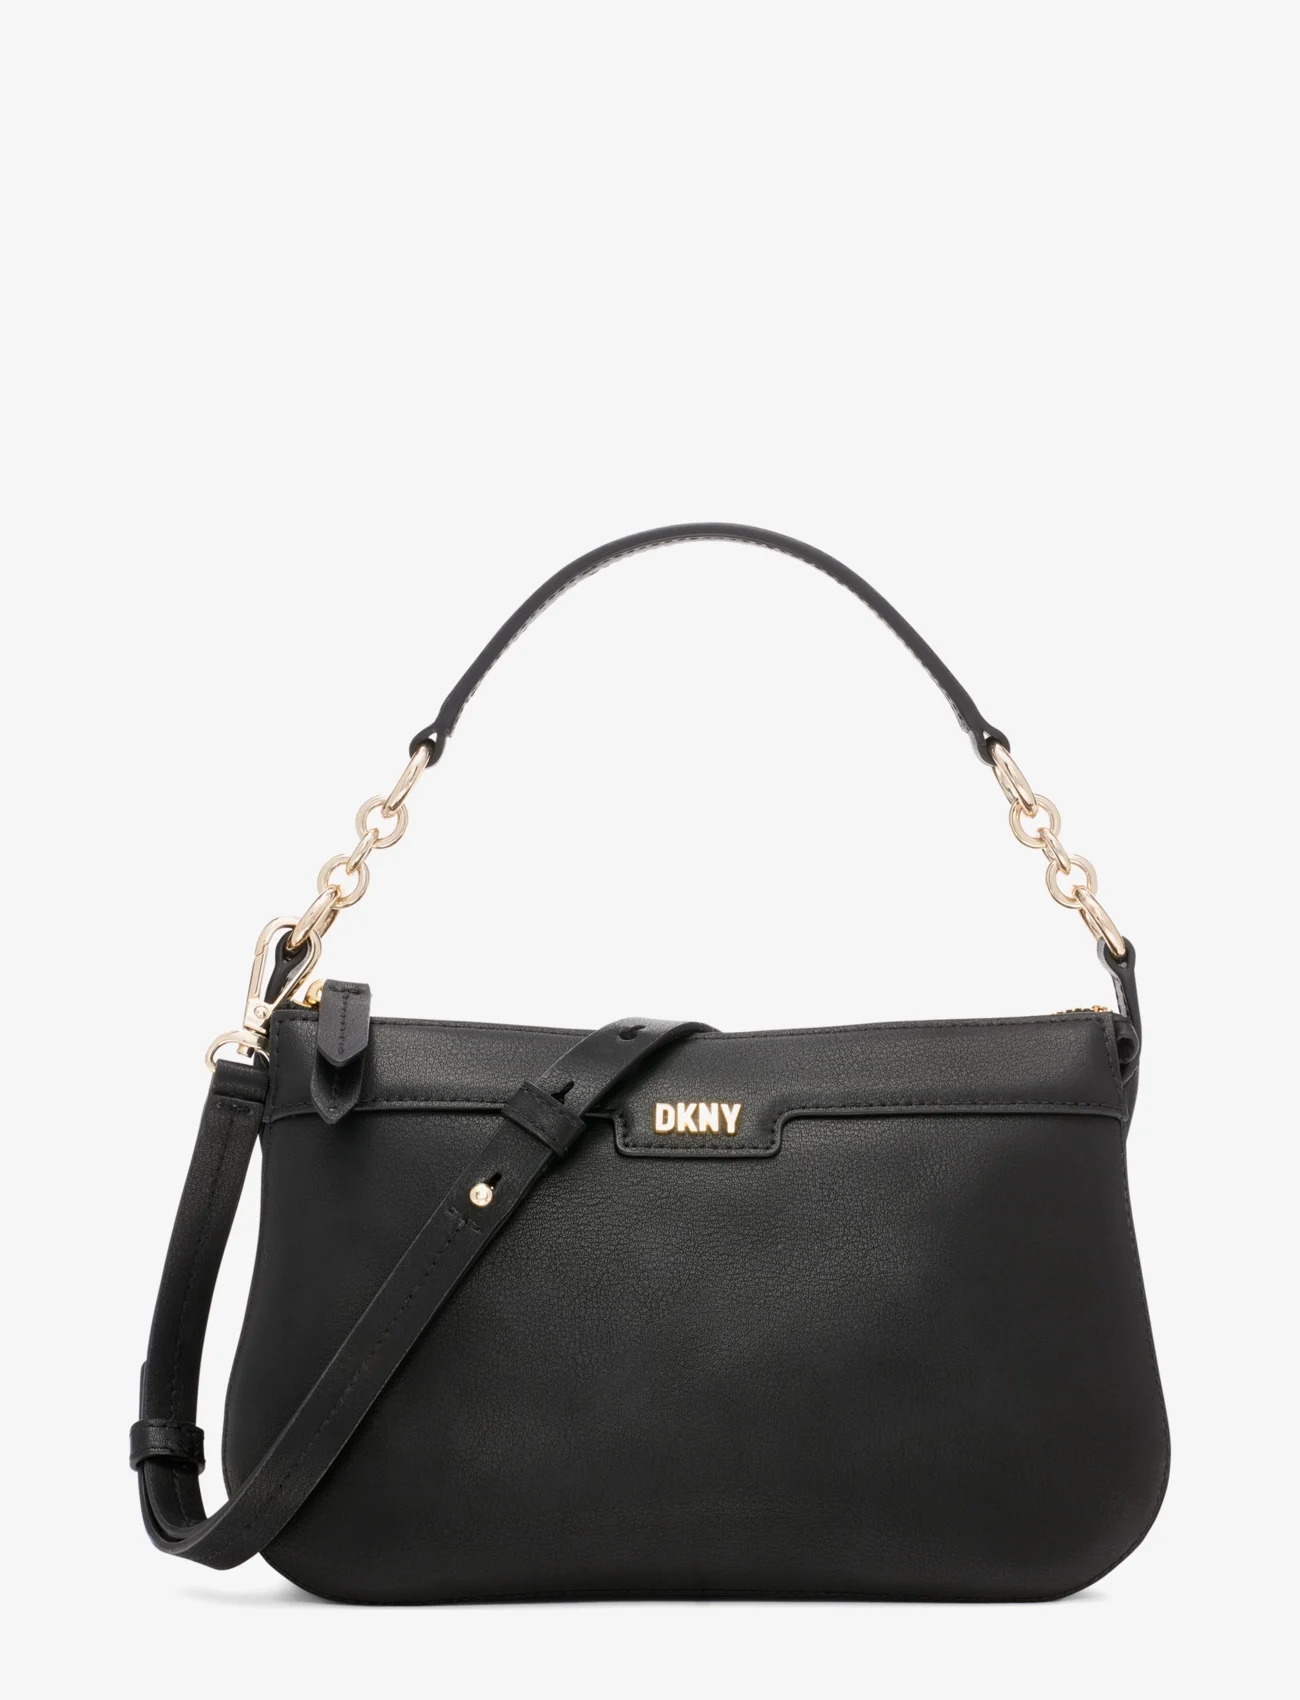 DKNY Bags - GRAMERCY SM SHOULDER BAG - party wear at outlet prices - bgd - blk/gold - 0